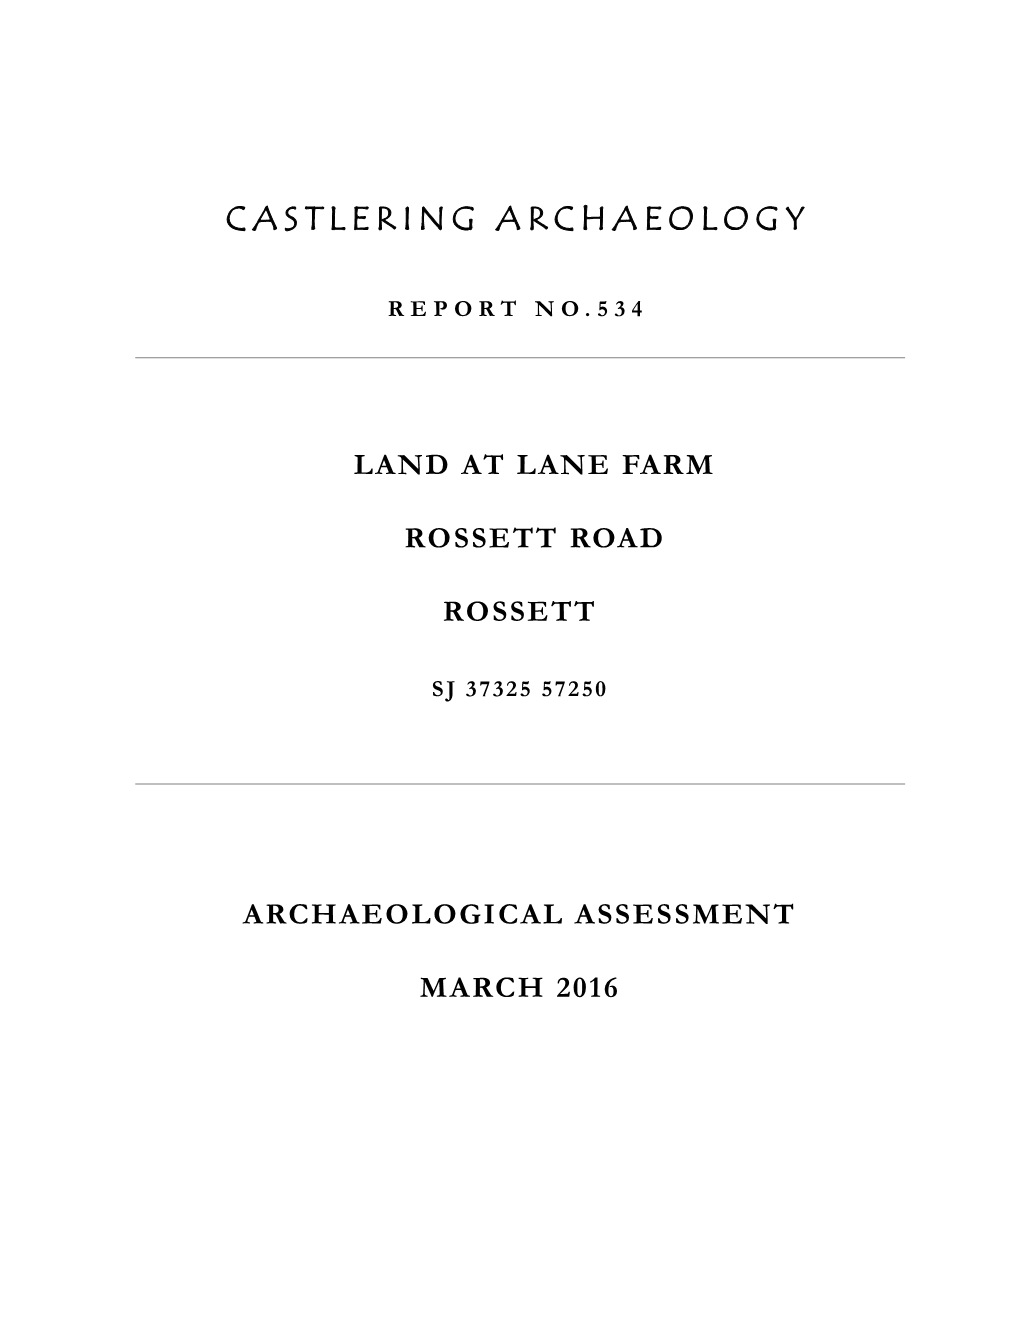 Castlering Archaeology Report No